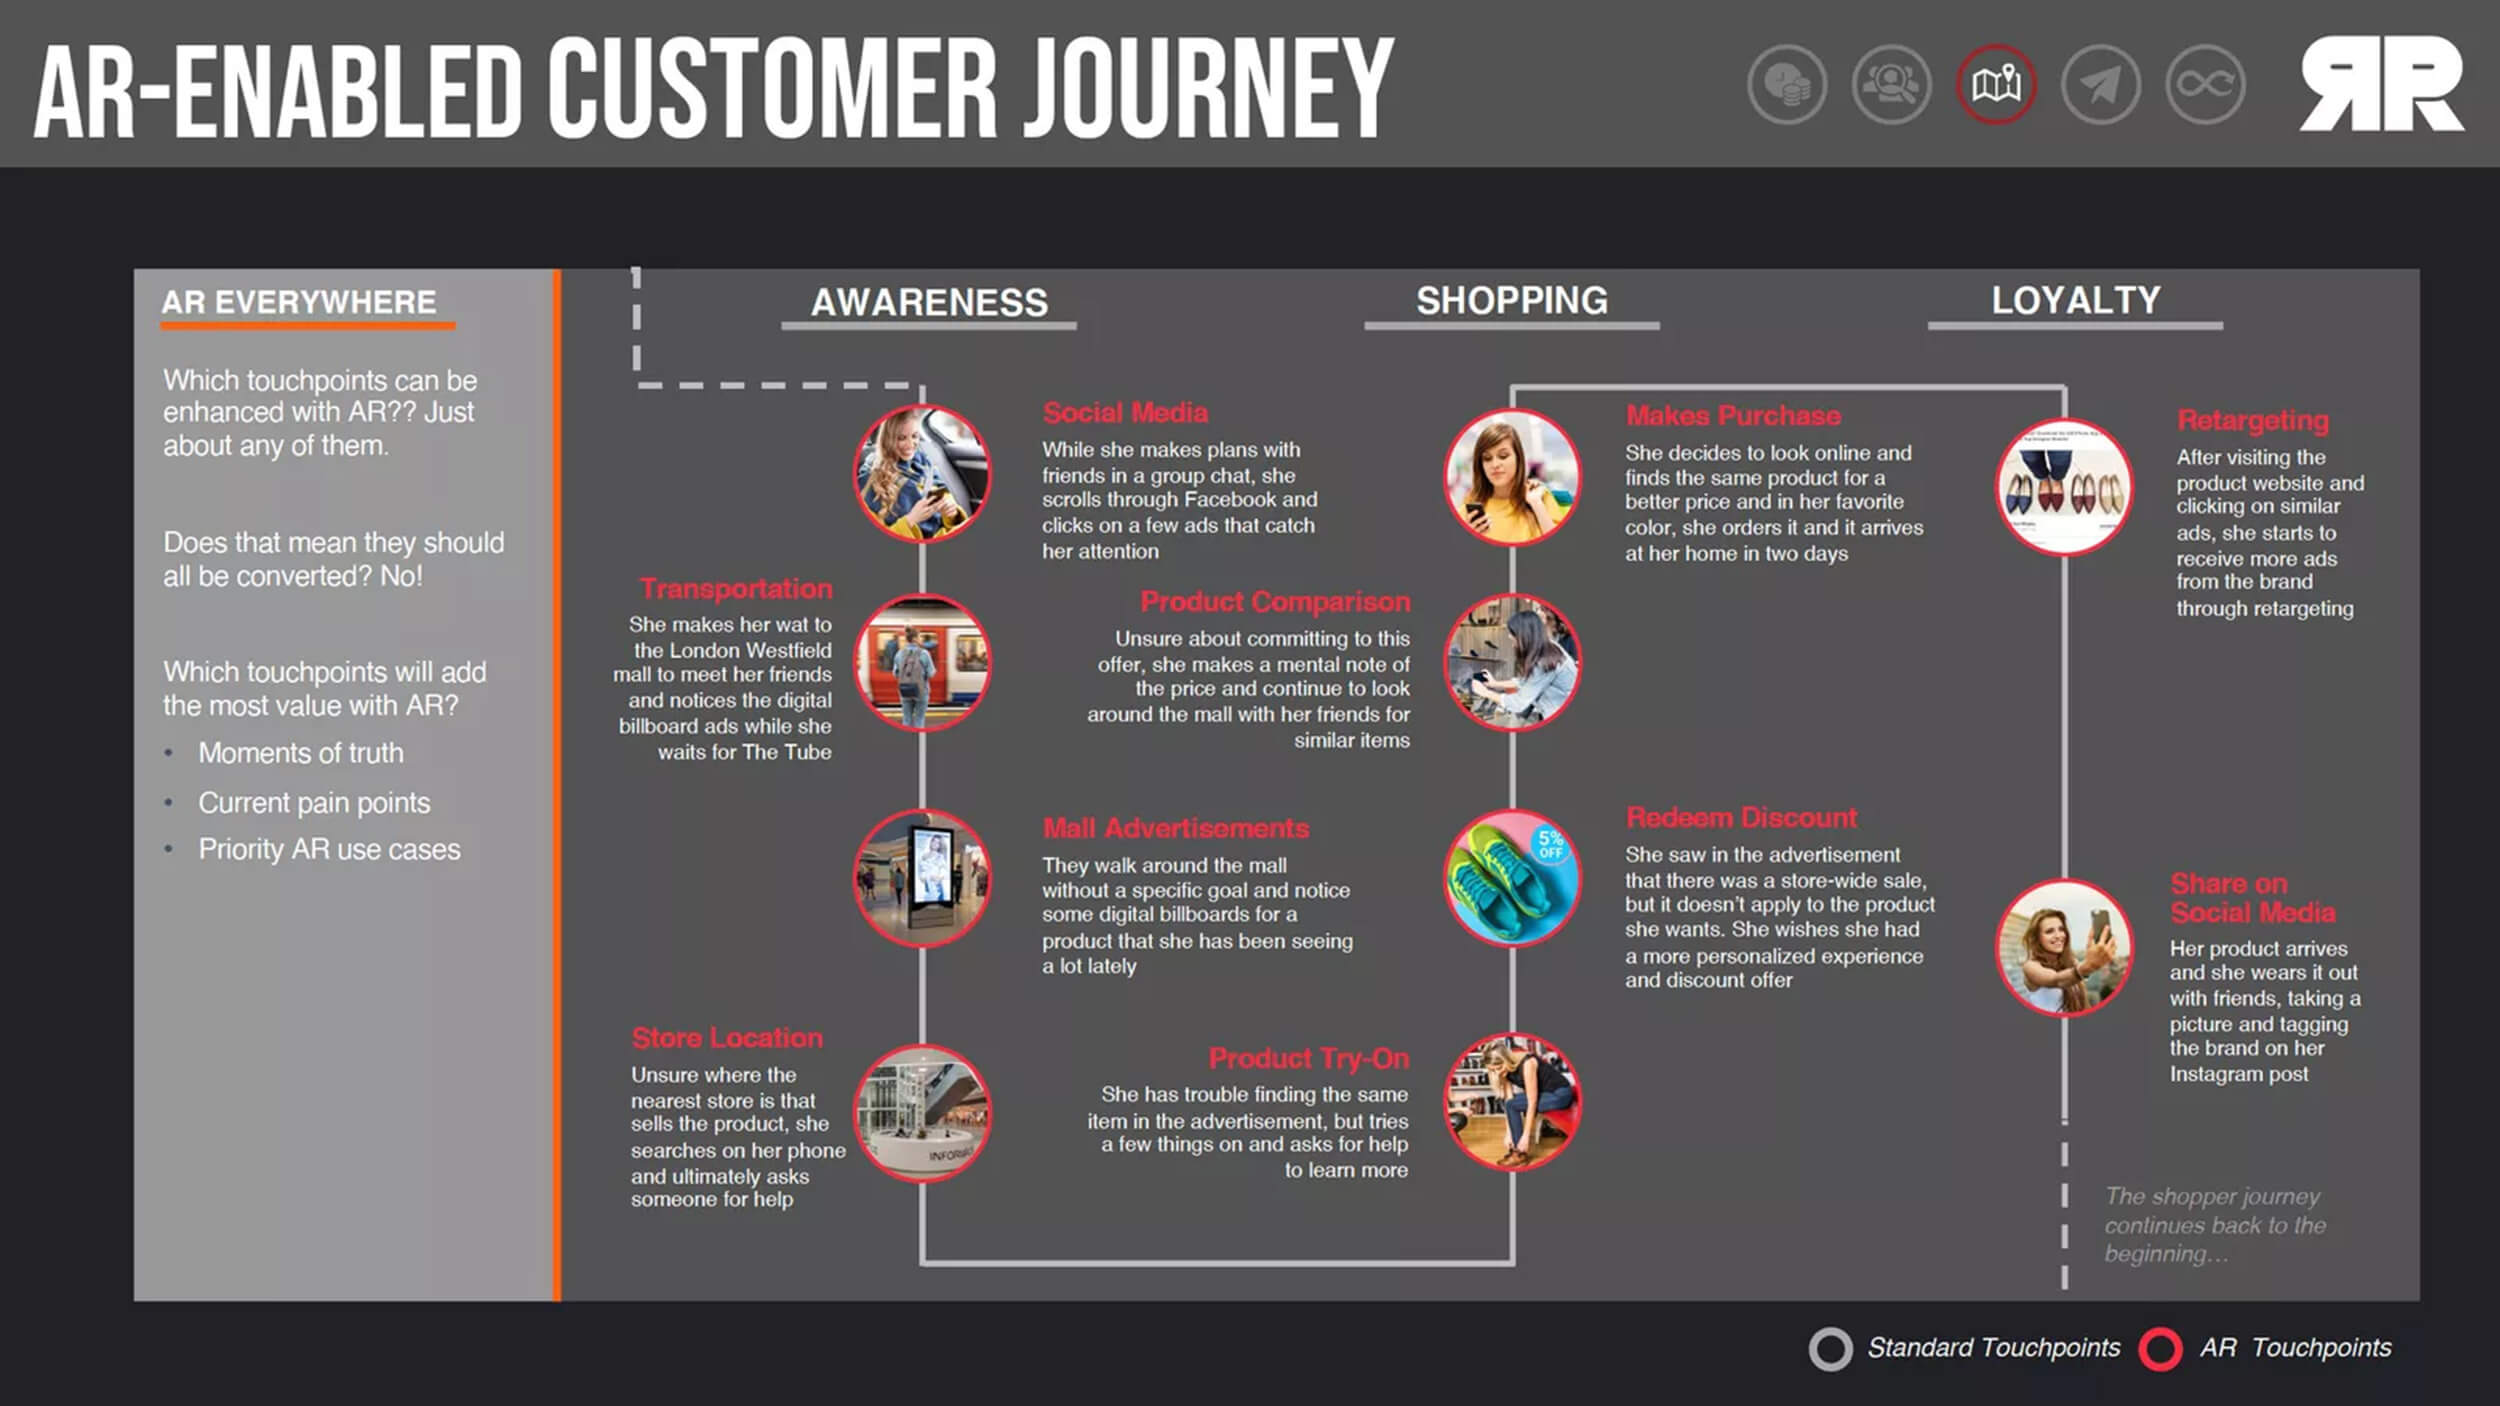 What are your AR activation points within your customer journey?